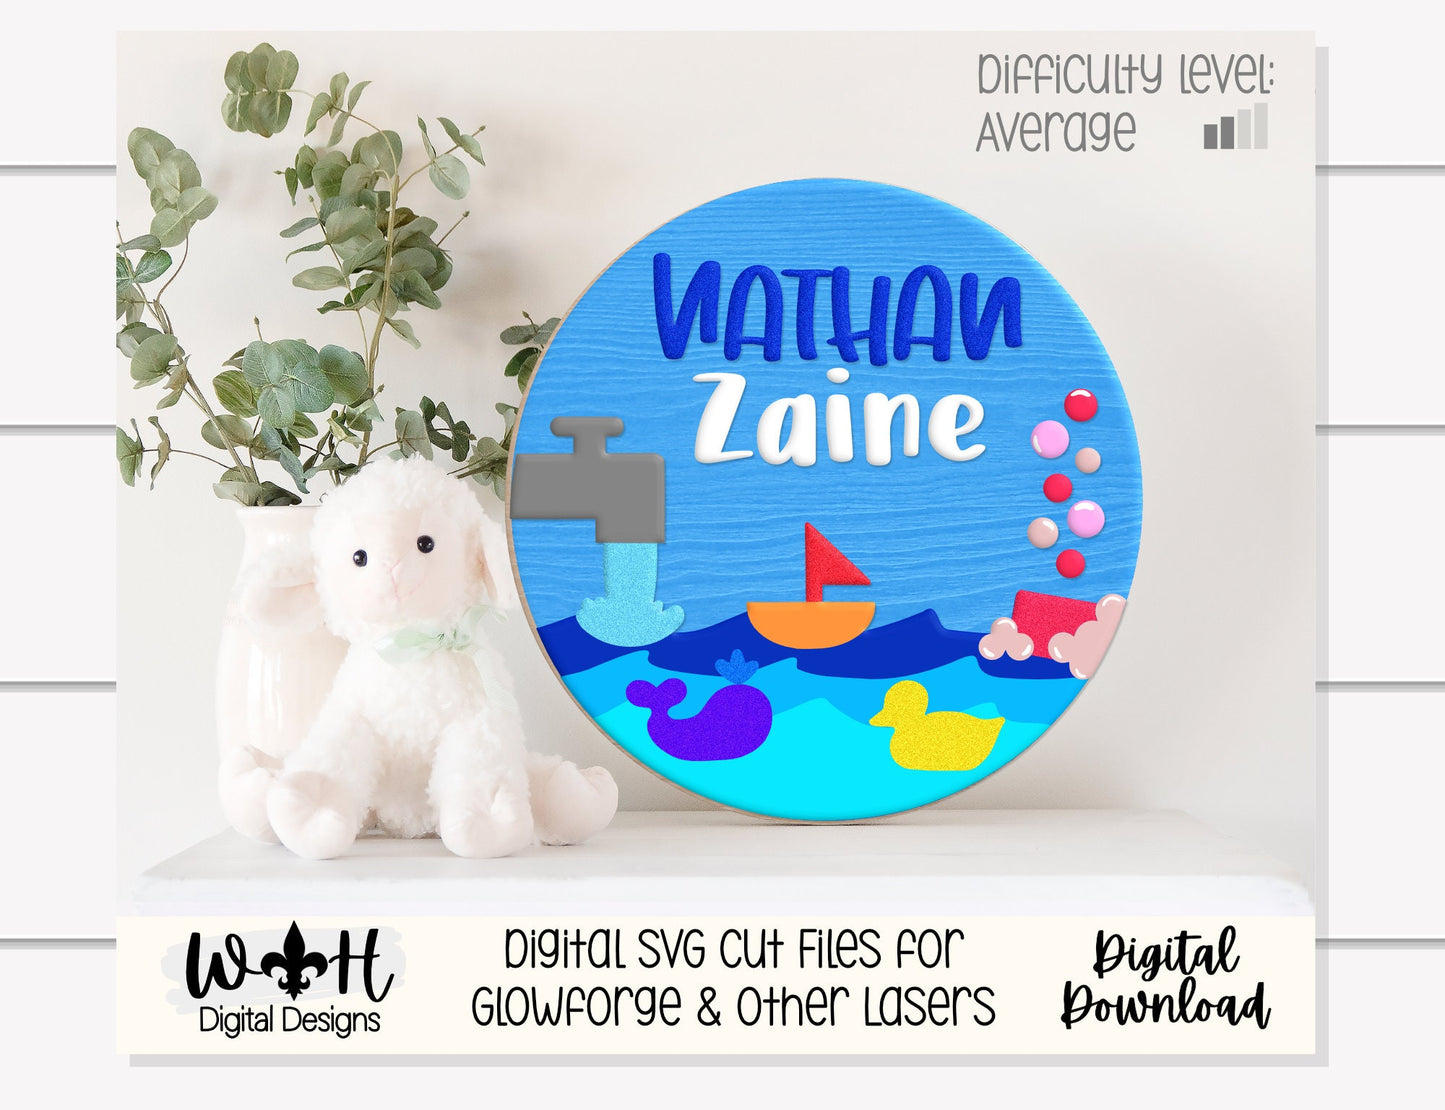 Bathtub Time Bubble Bath Baby Nursery Round - Sign Making Home Decor and DIY Kits - Cut File For Glowforge Lasers - Digital SVG File